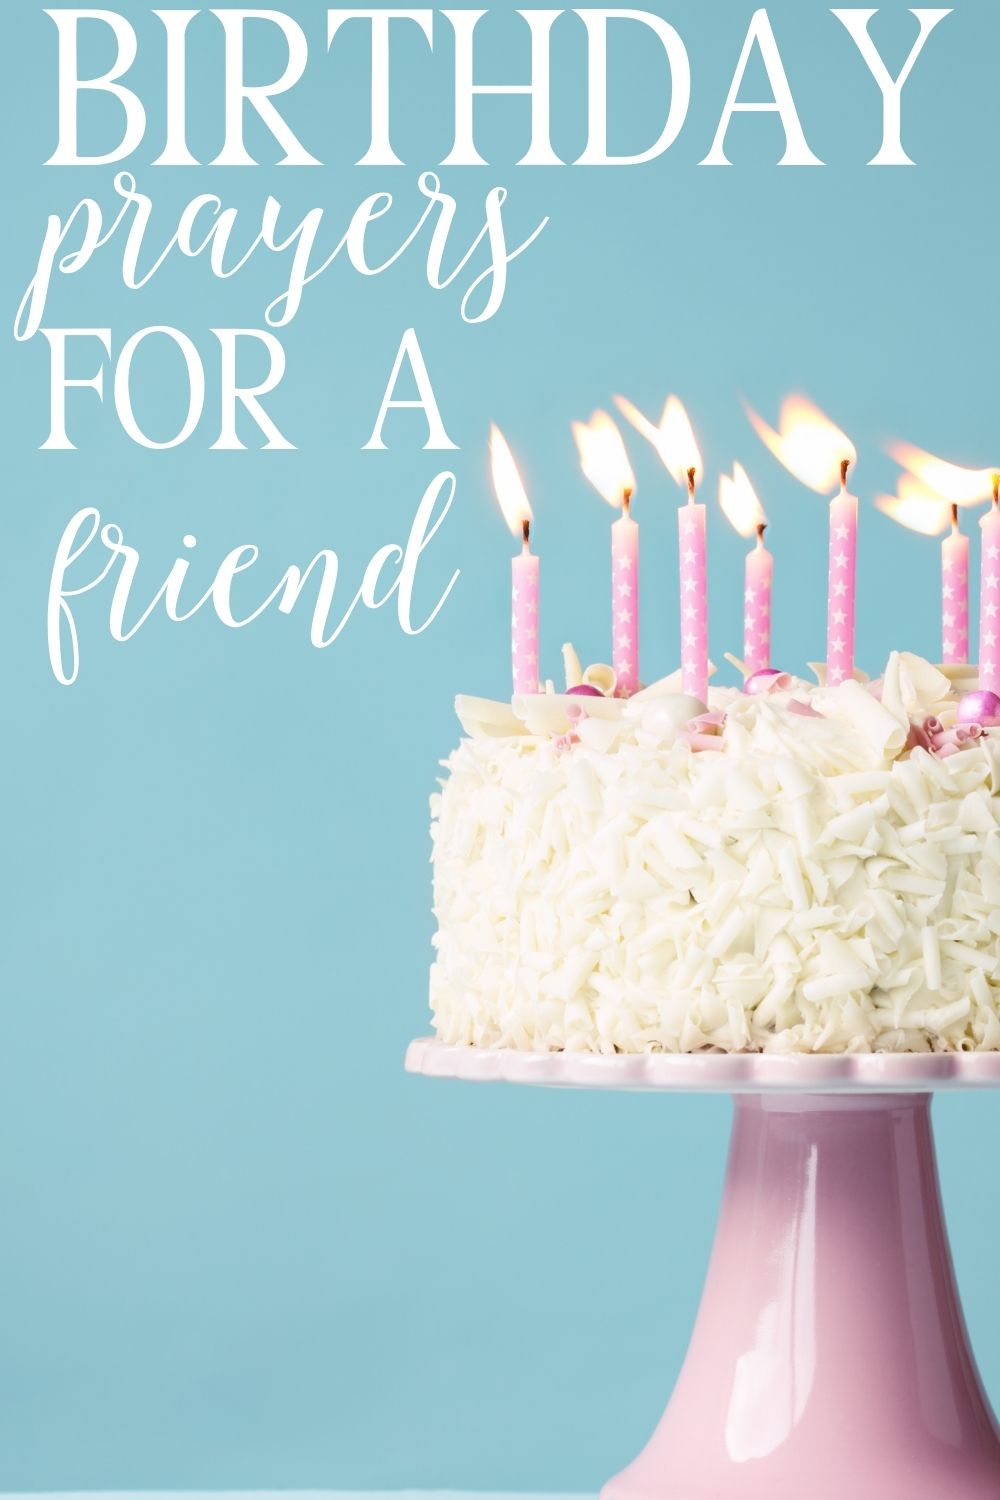 pinterest pin about birthday prayers for a friend with white icing and pink candles on a pink pedestal against a blue background